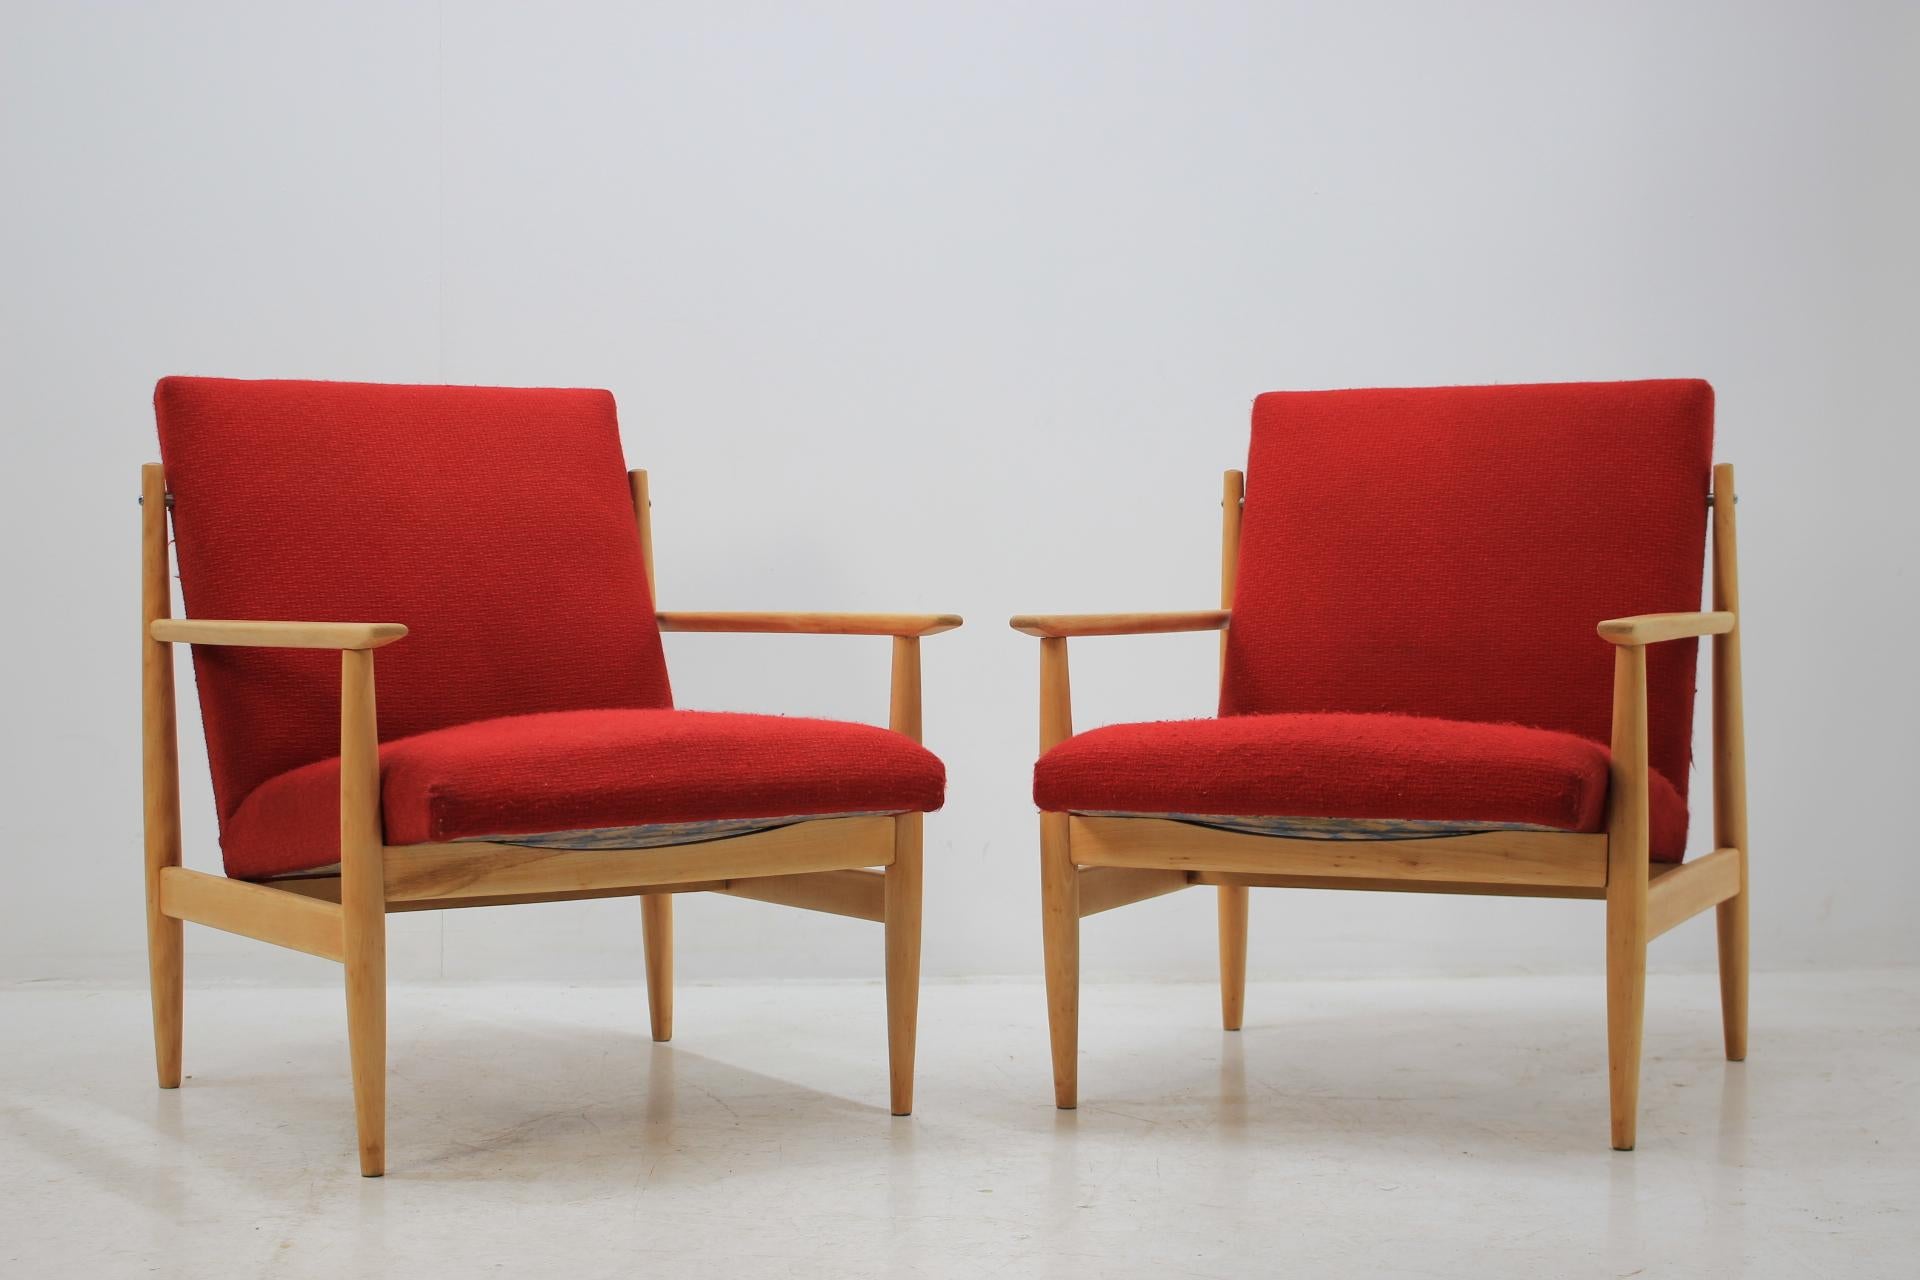 - Made of oak, original upholstery
- Made in Czechoslovakia
- Suitable for renovation upholstery
- Good, original condition.